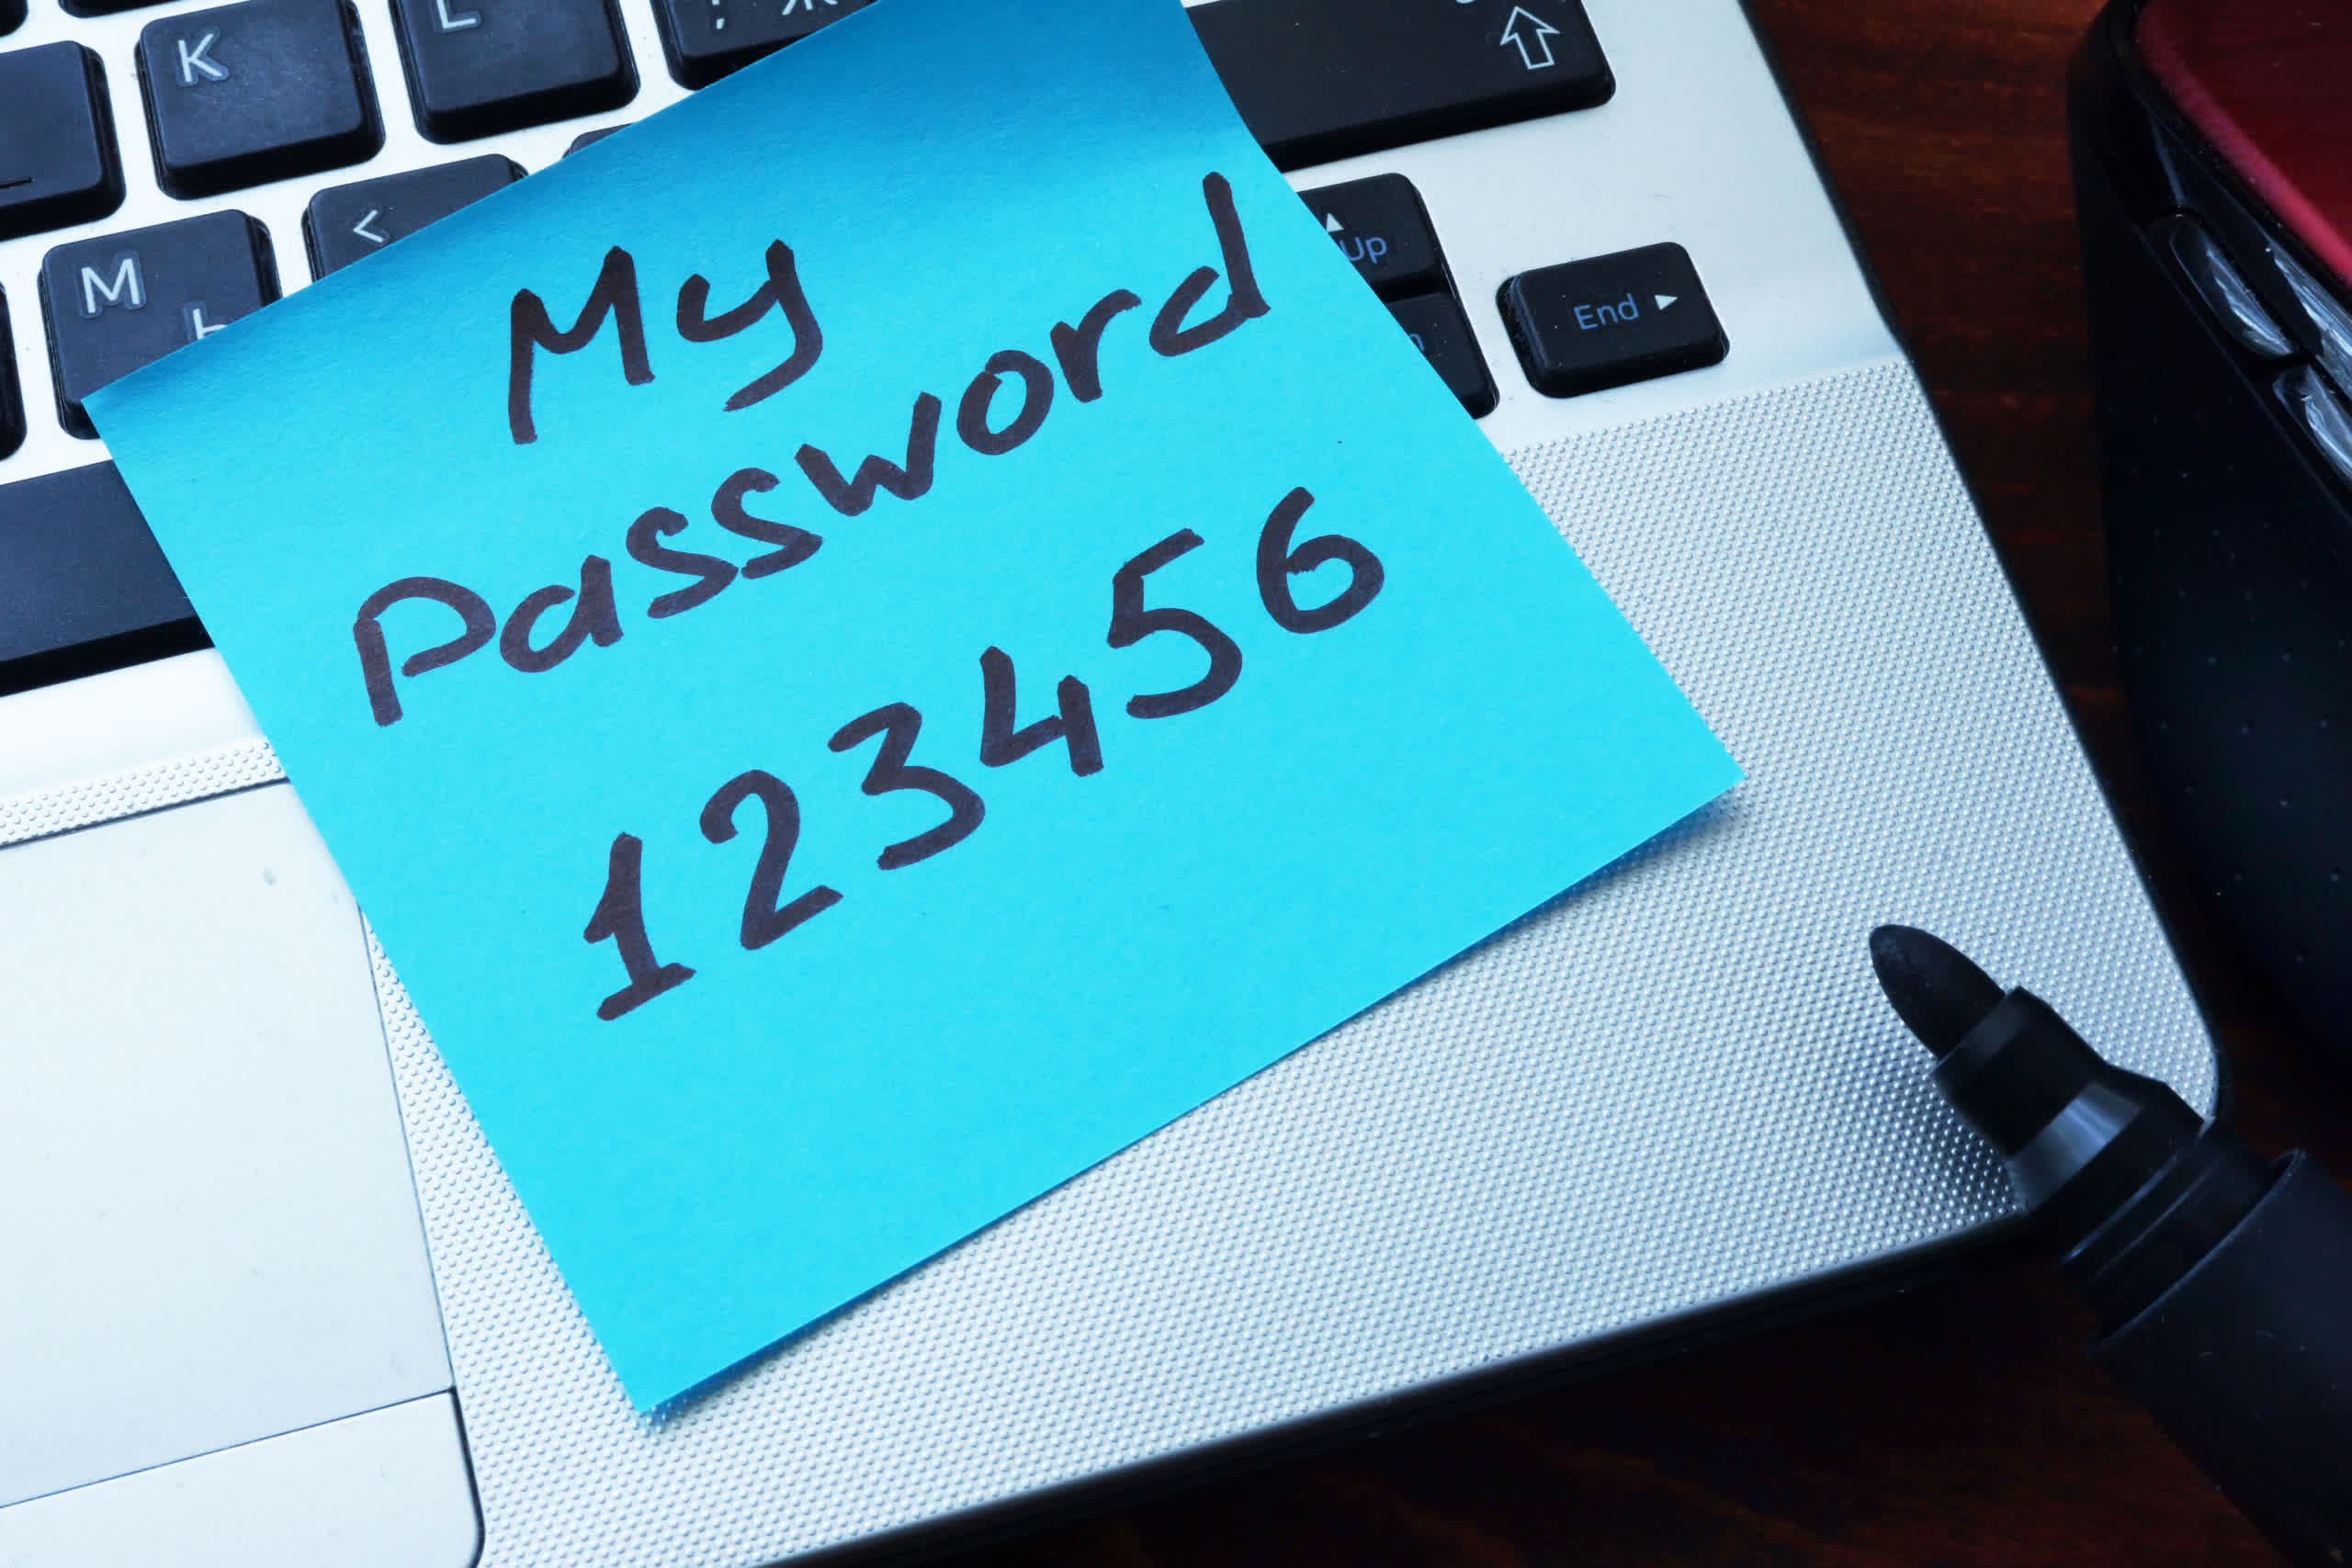 The most common passwords of 2021 are outright embarrassing